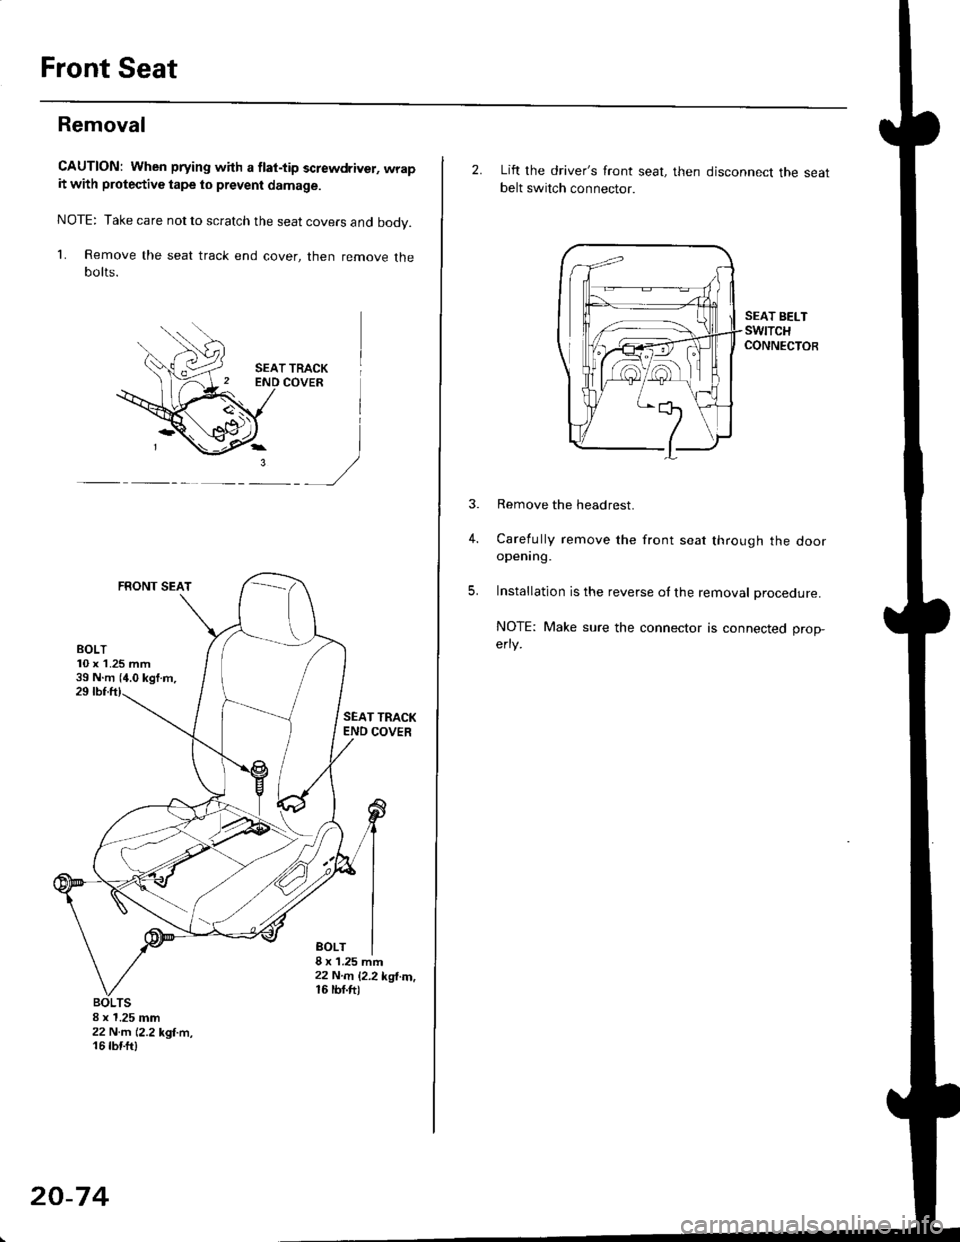 HONDA CIVIC 1998 6.G Workshop Manual Front Seat
Removal
CAUTION: When prying with a flat-tip screwdriver, wrapit with protective tape lo prevent damage.
NOTE: Take care not to scratch the seat covers and body.
1. Remove the seat track en